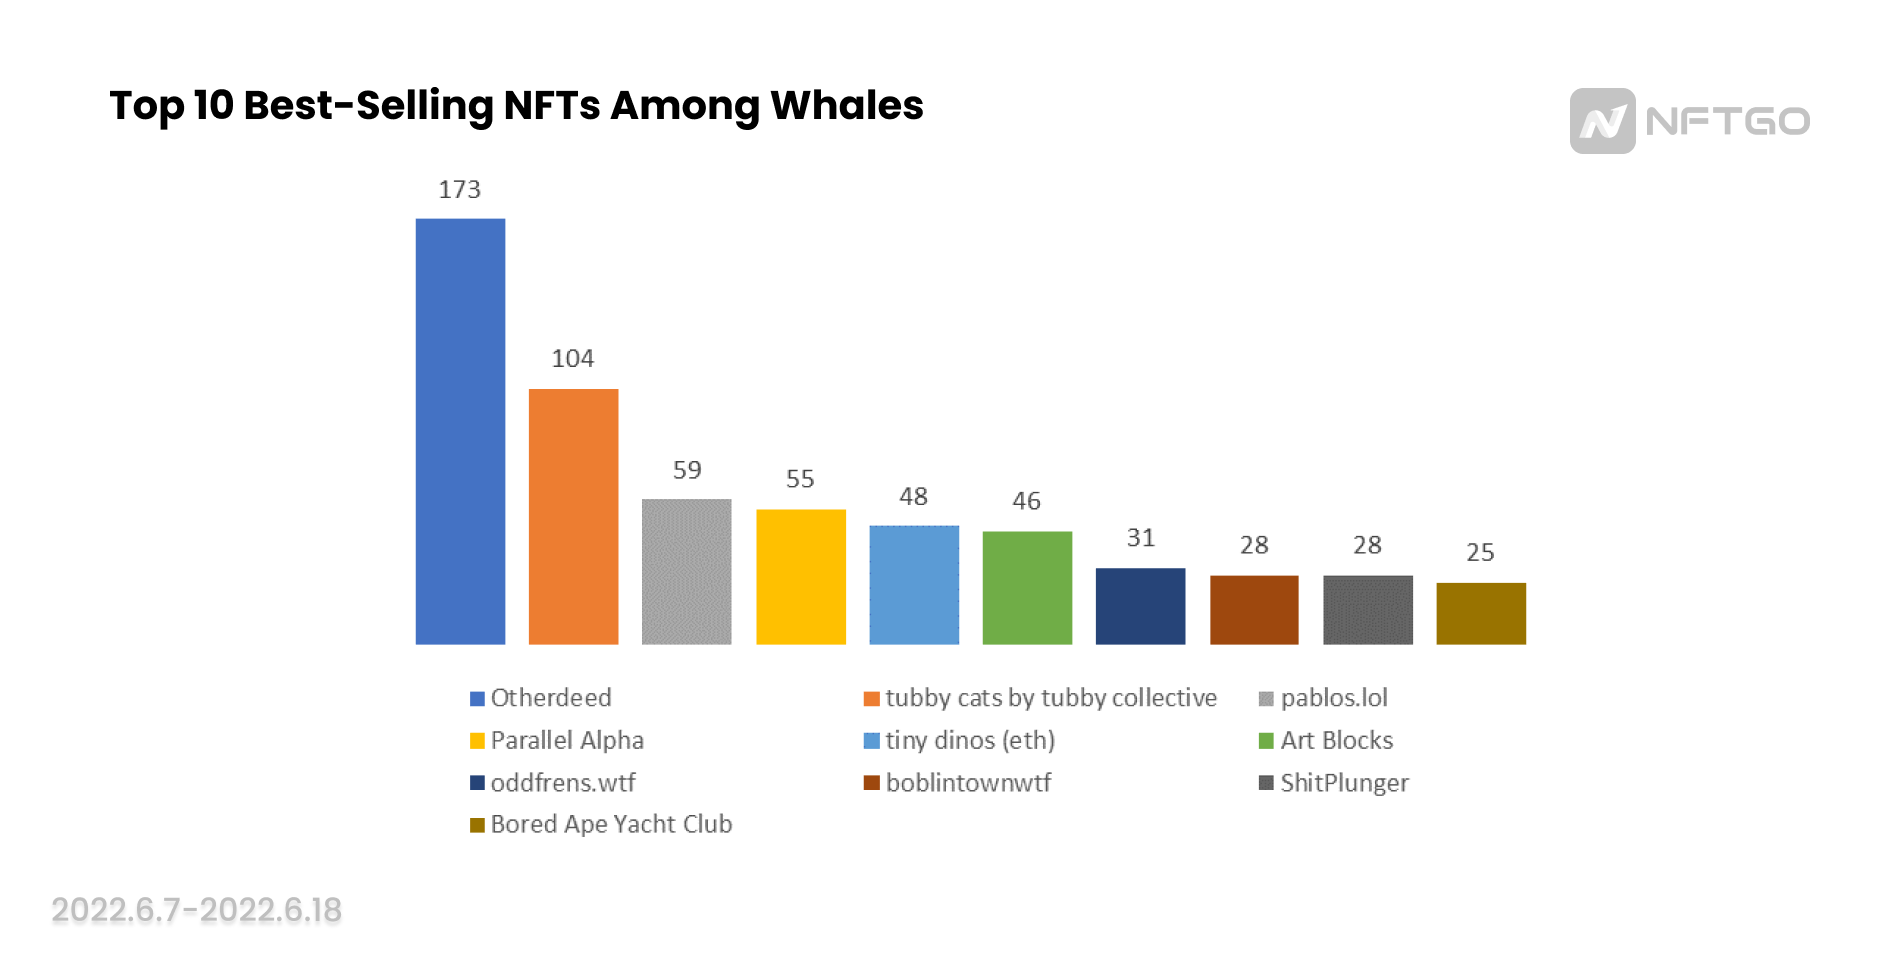 Top 10 Best-Selling NFTs Among Whales (6.7-6.18) (Source: NFTGo.io)